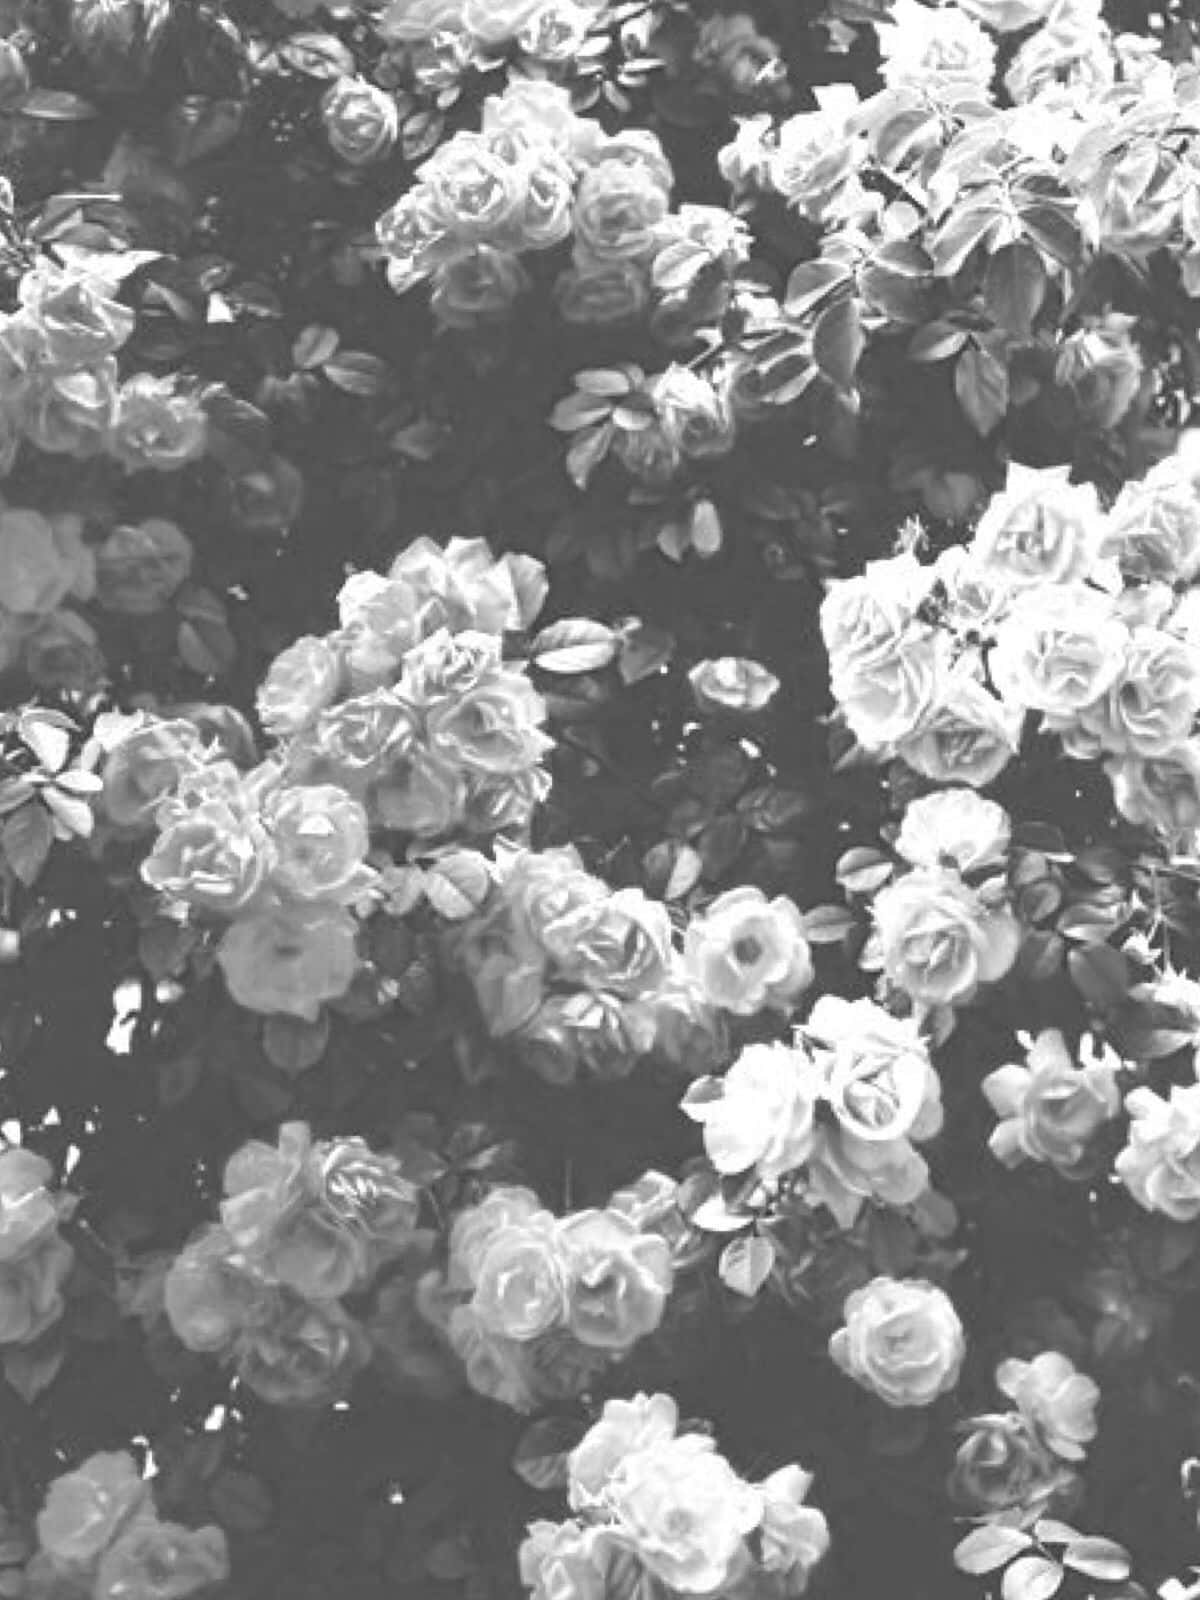 A beautiful, monochromatic flower in classic black and white. Wallpaper